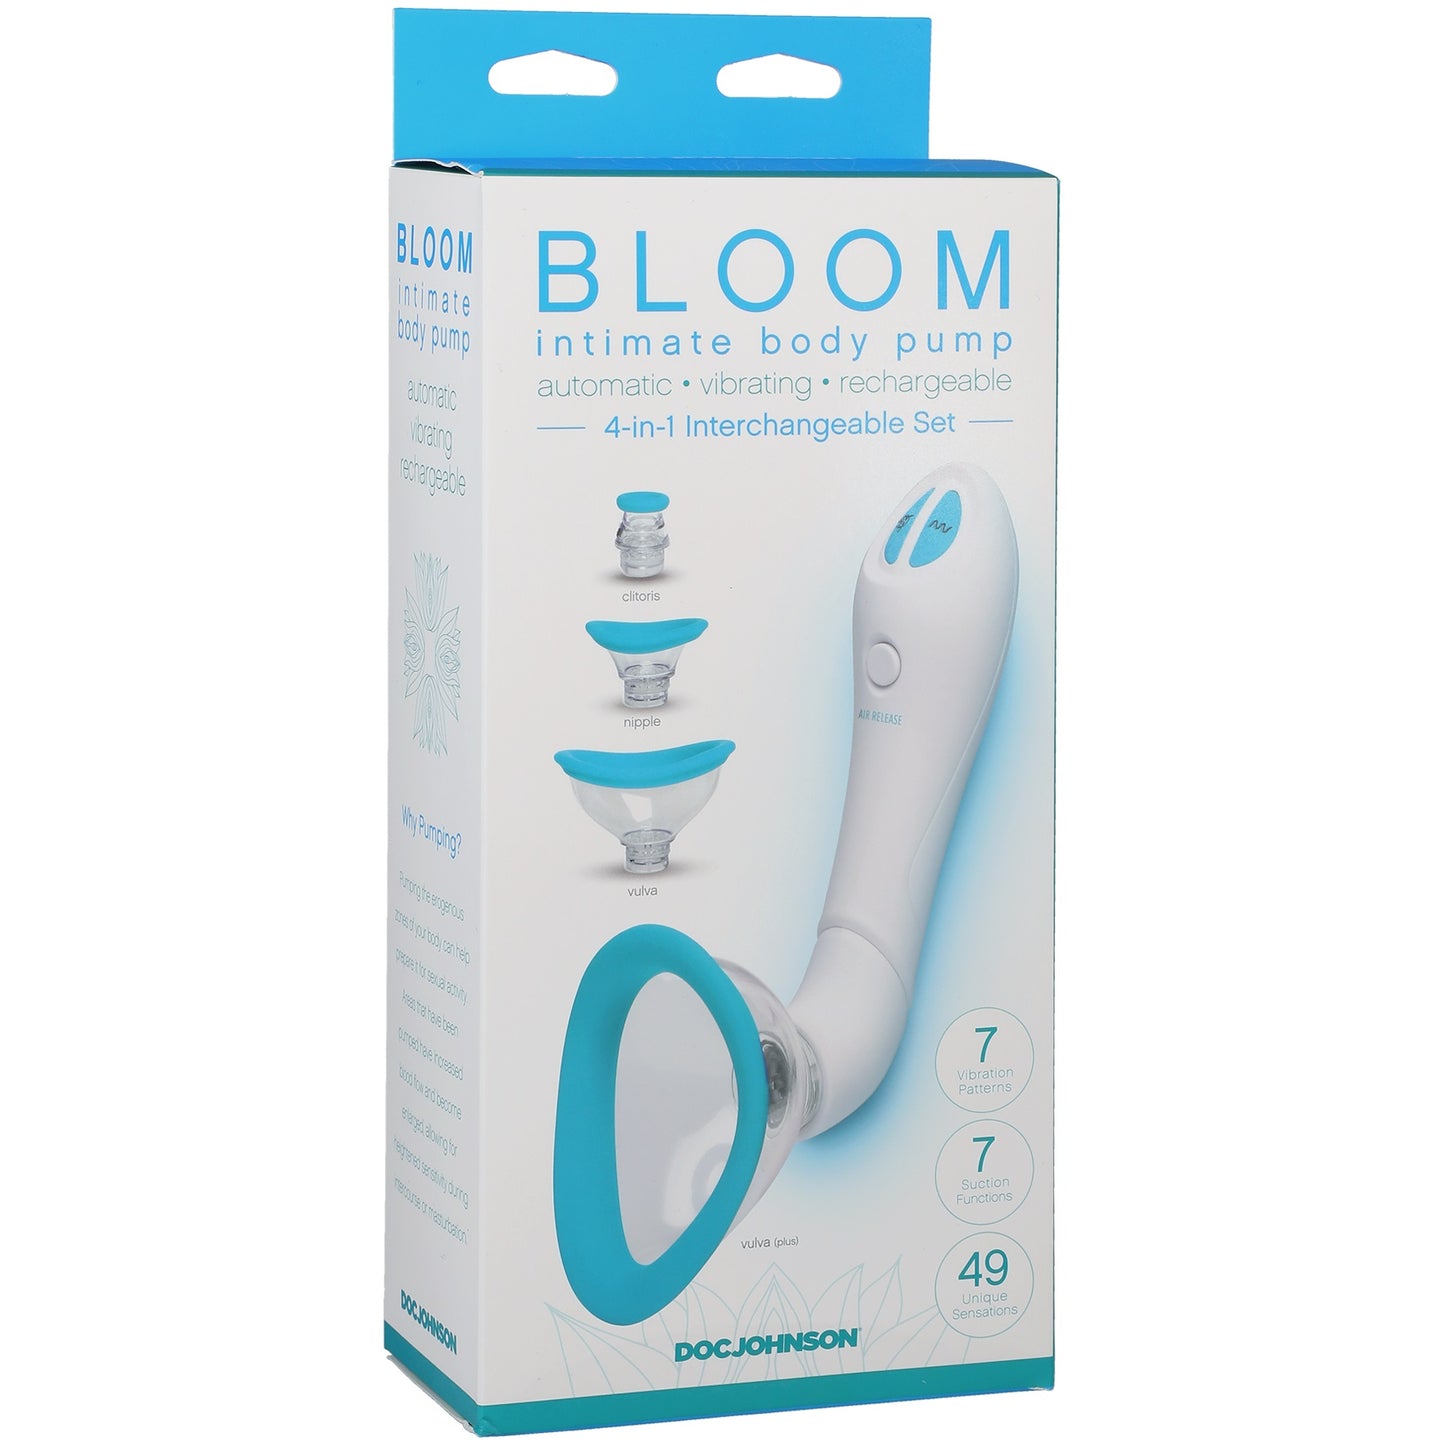 Bloom - Intimate Body Pump - Automatic - Vibrating - Rechargeable